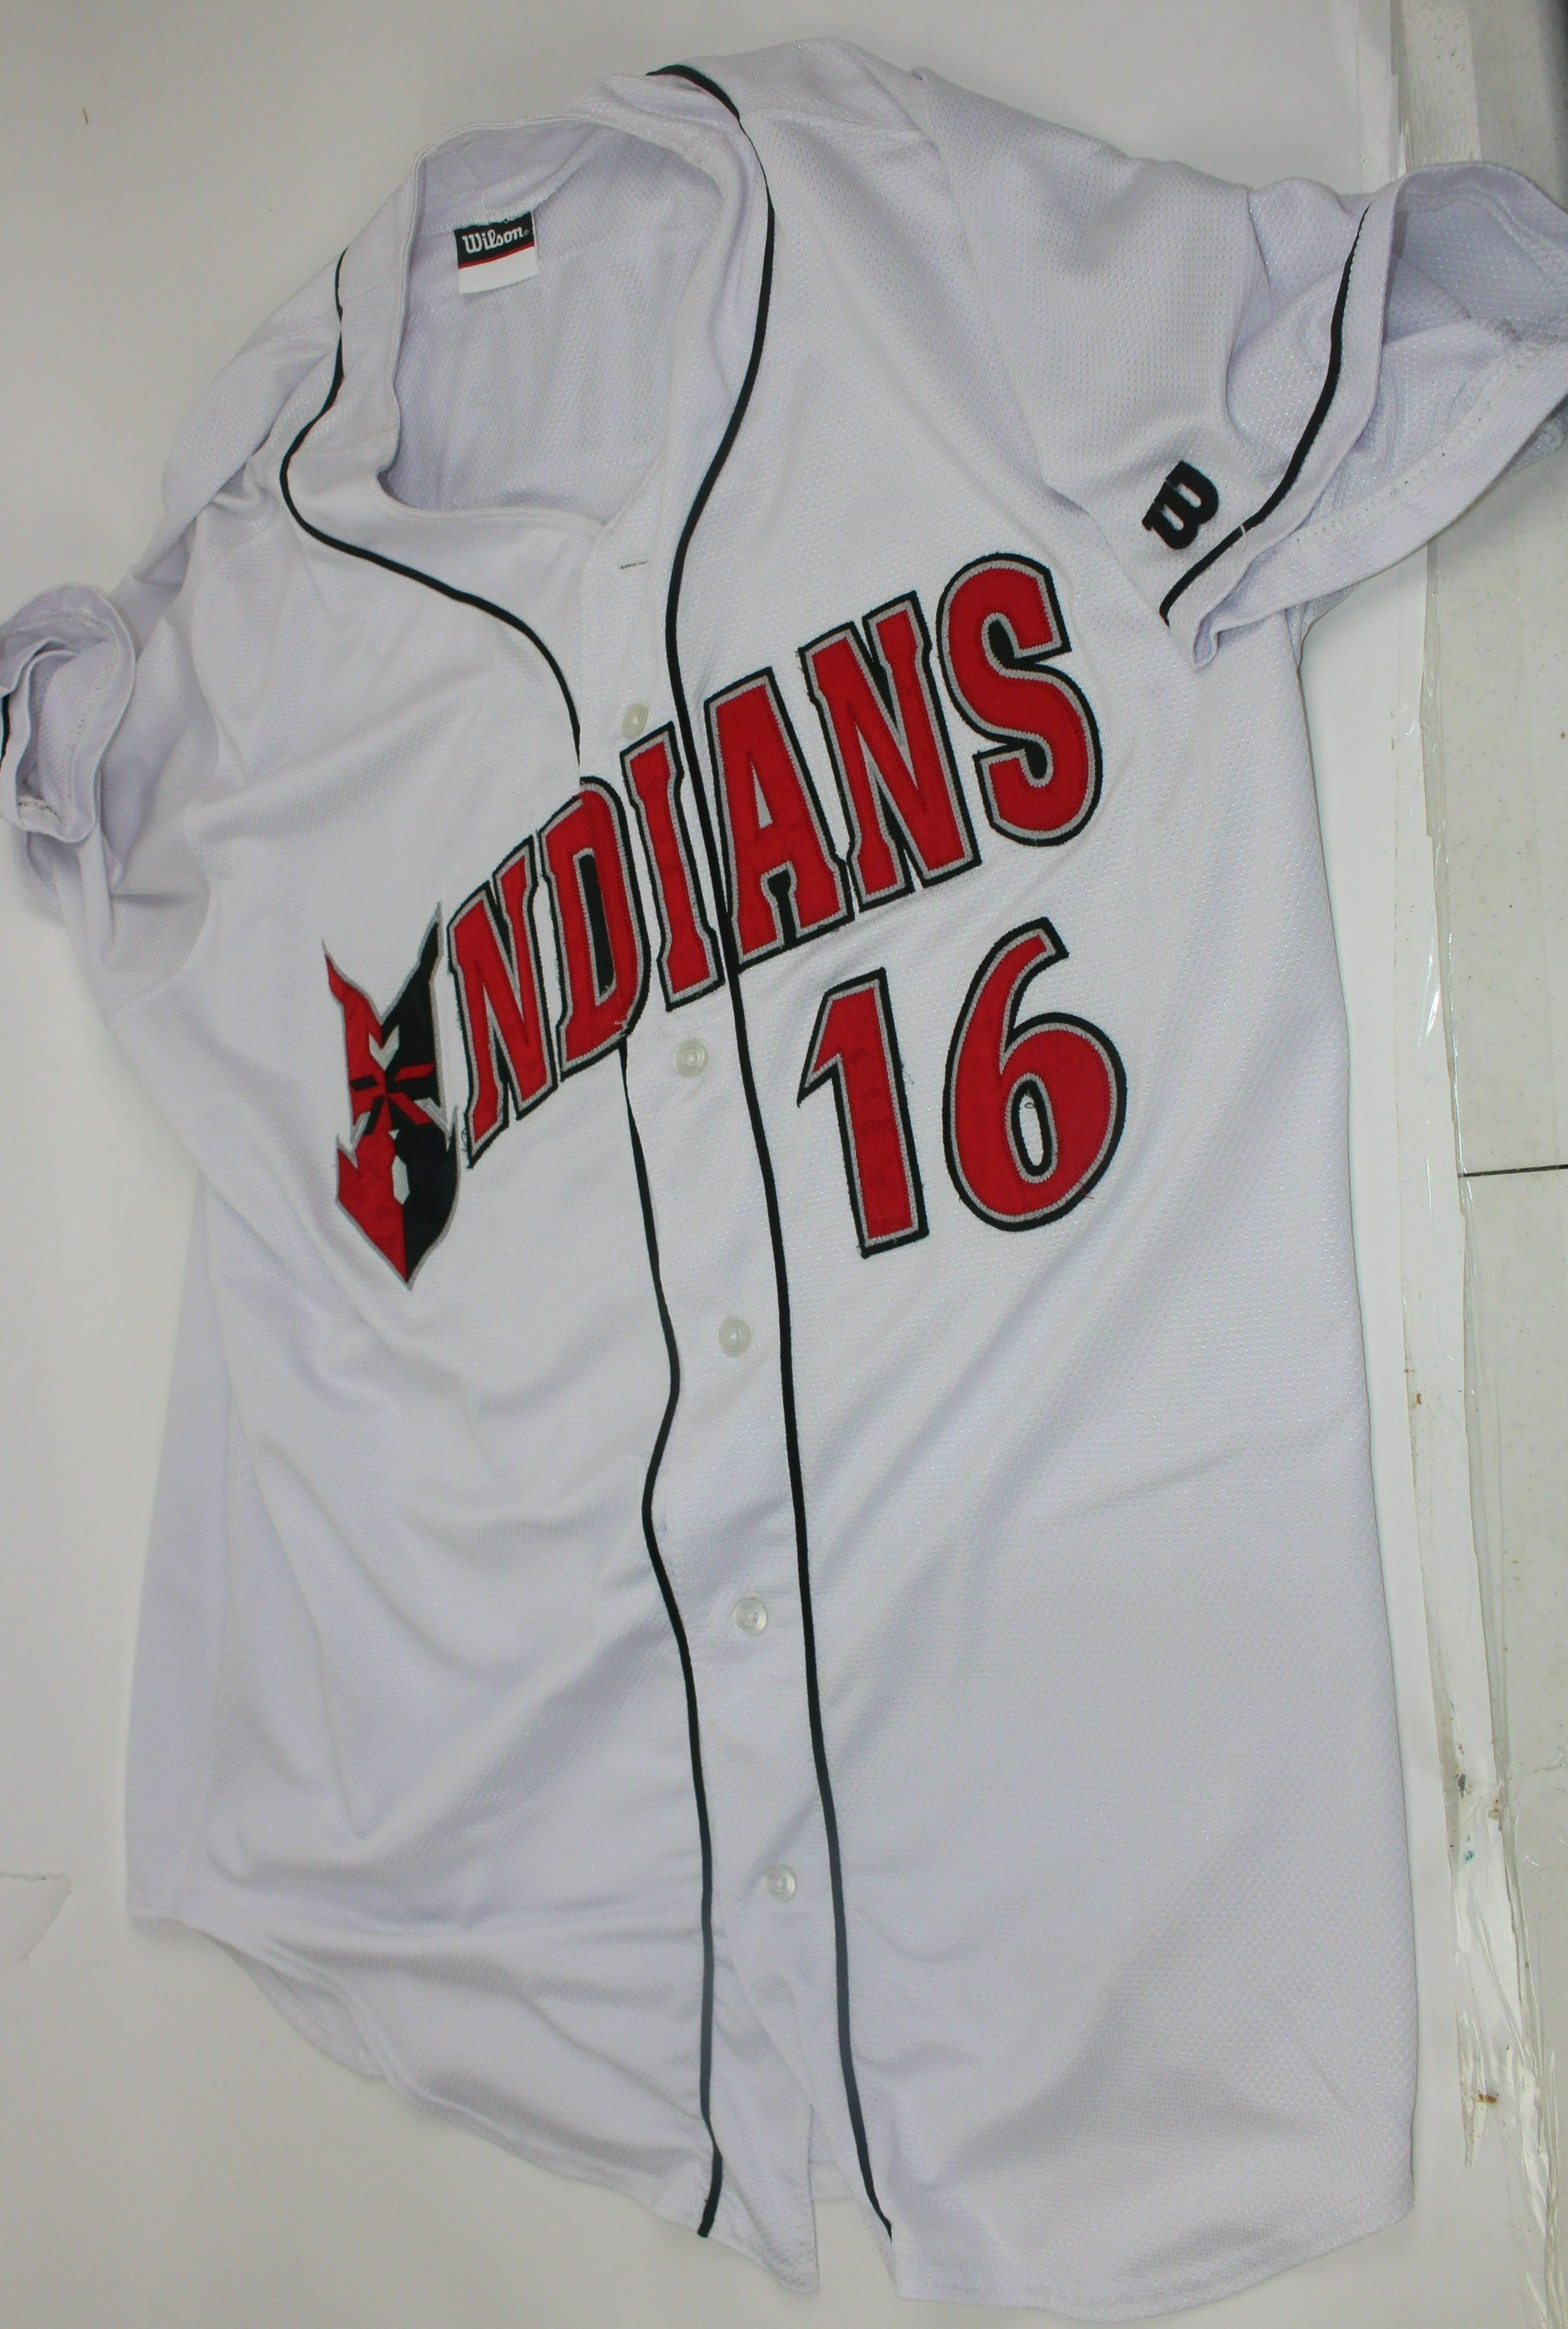 USED RED CLEVELAND INDIAN JERSEY SIZE XL